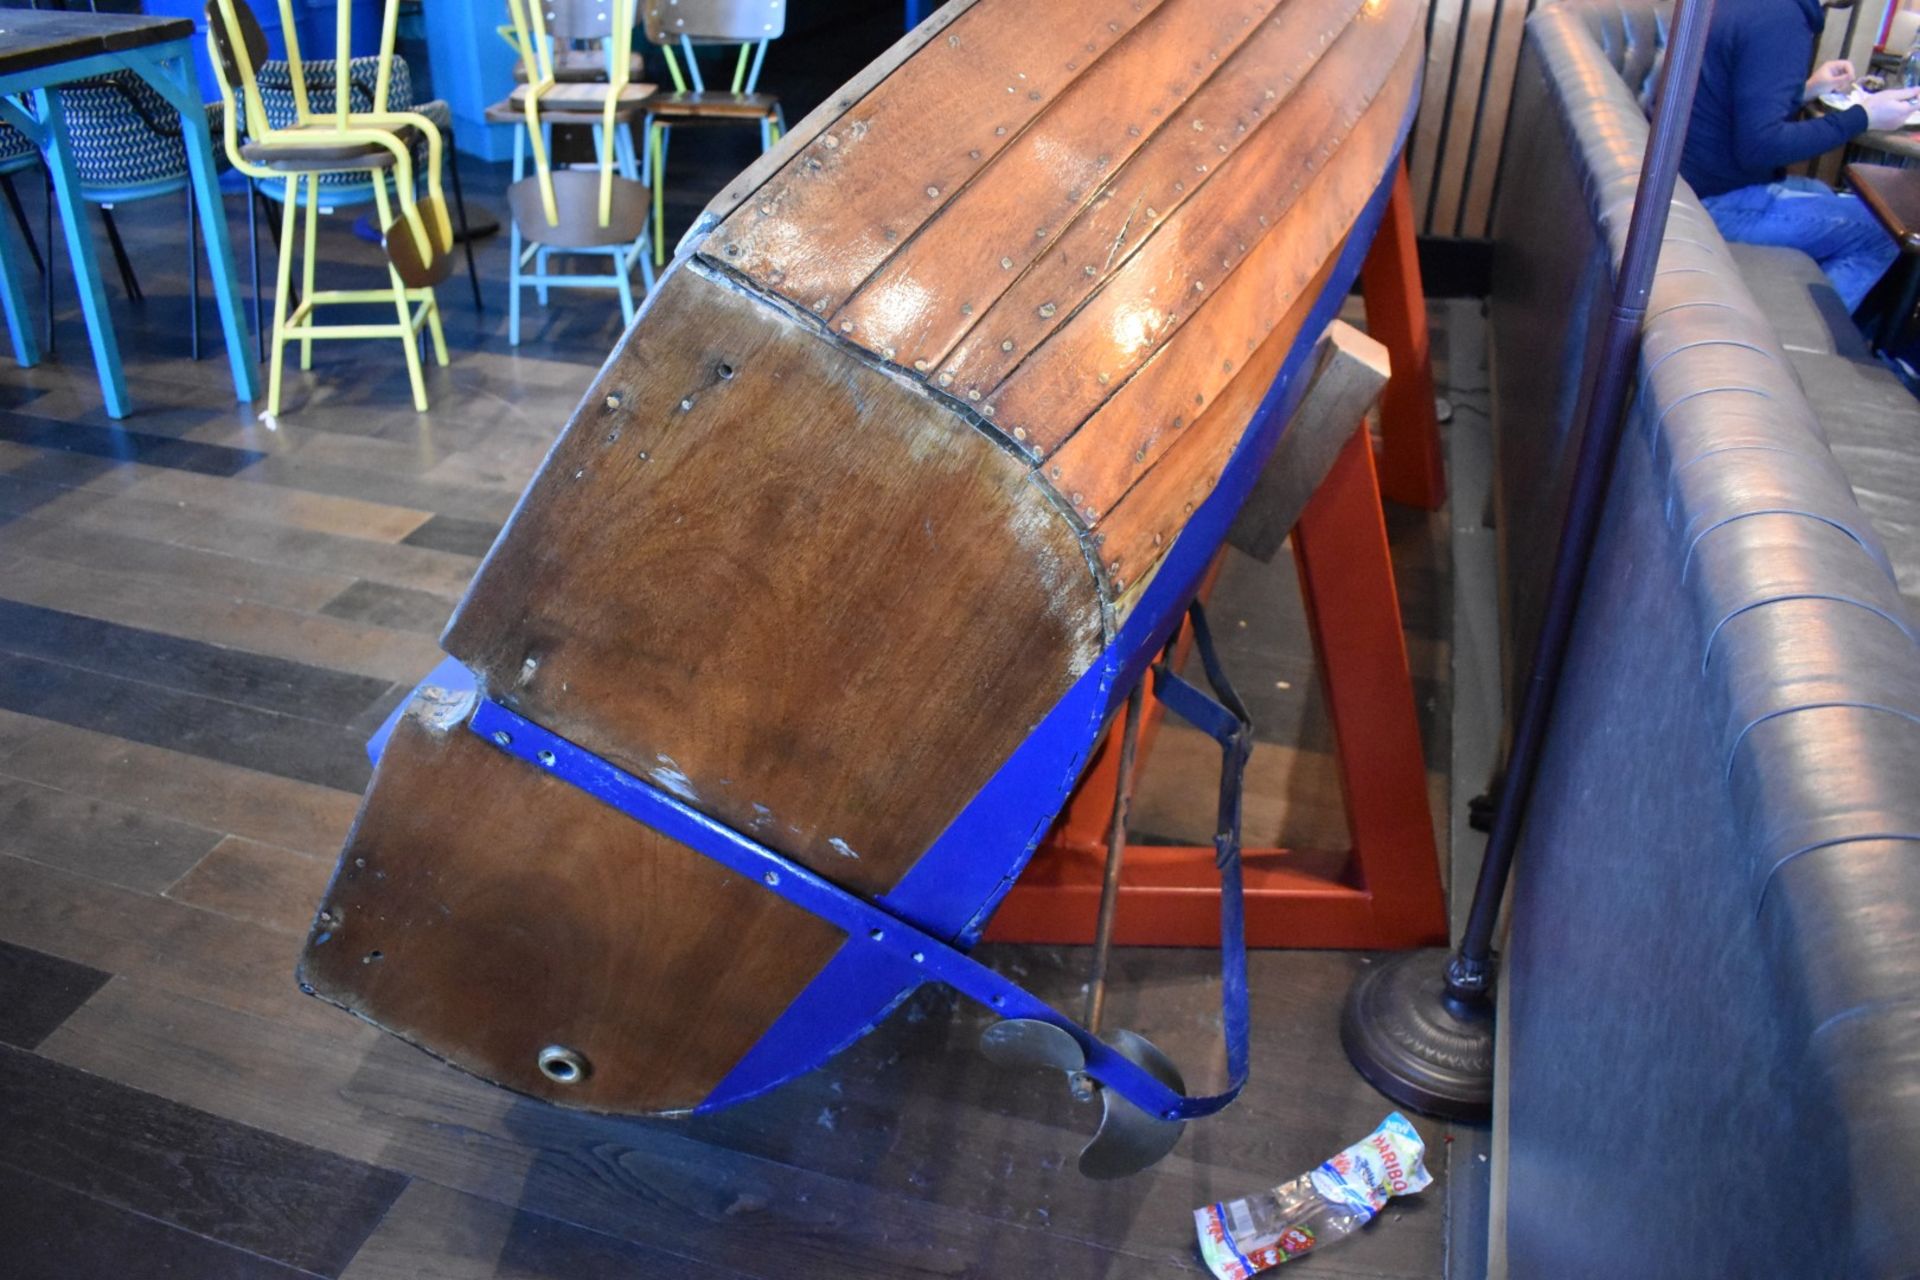 1 x Vintage Wooden Boat Repurposed Into Bespoke Seating Bench - Includes Heavy Duty Metal Frame - - Image 2 of 7